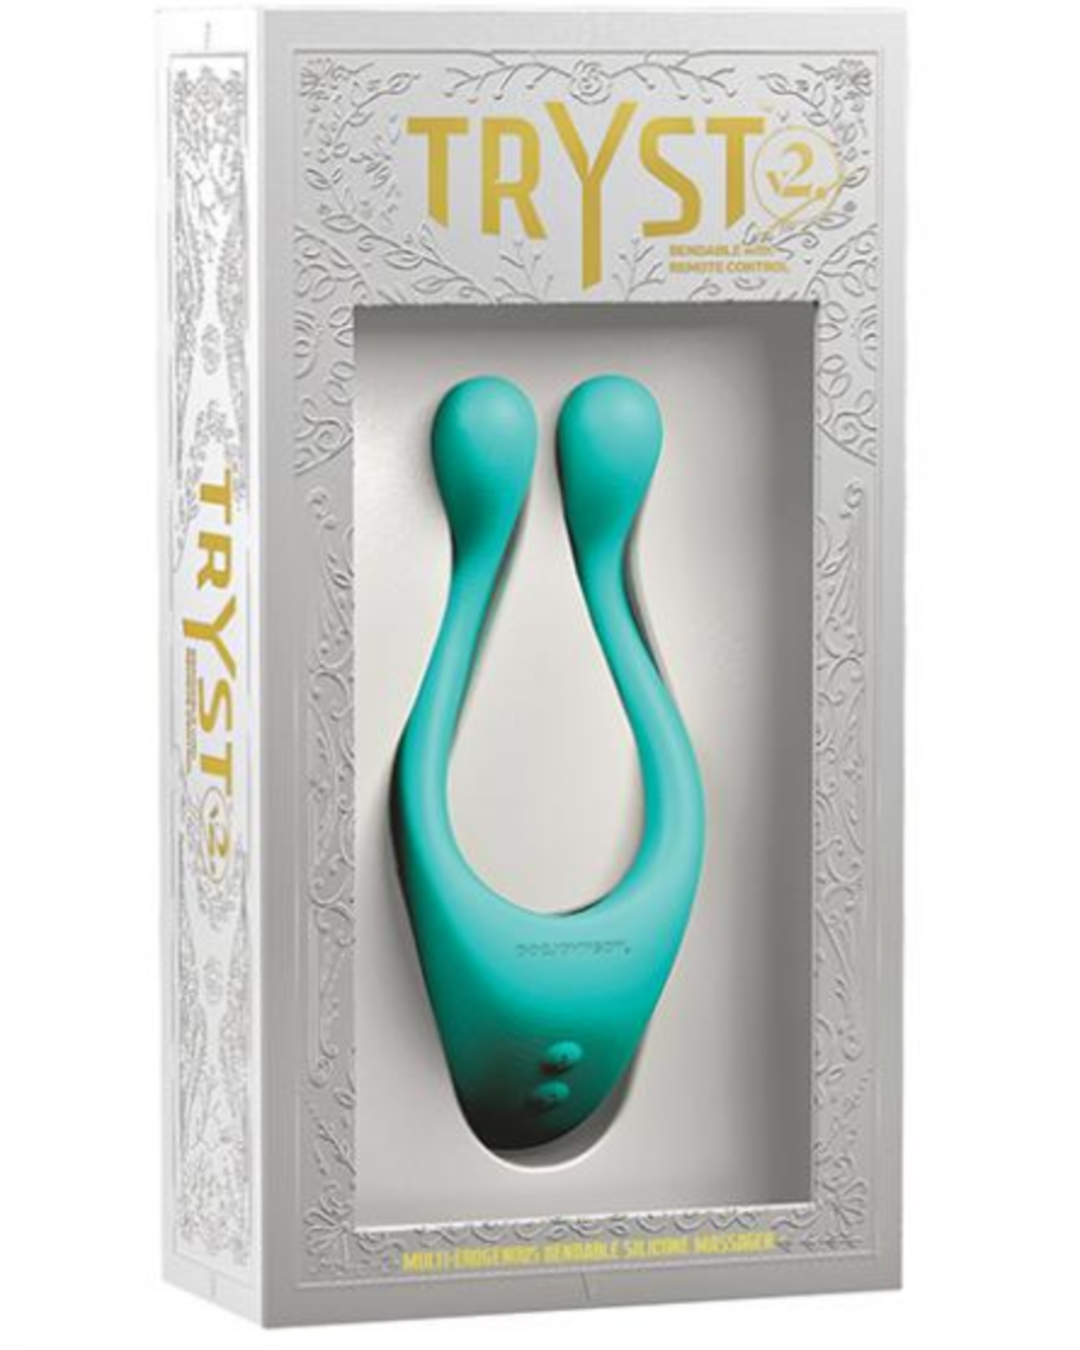 Tryst V2 Bendable Massager with Remote by Doc Johnson - Green Box